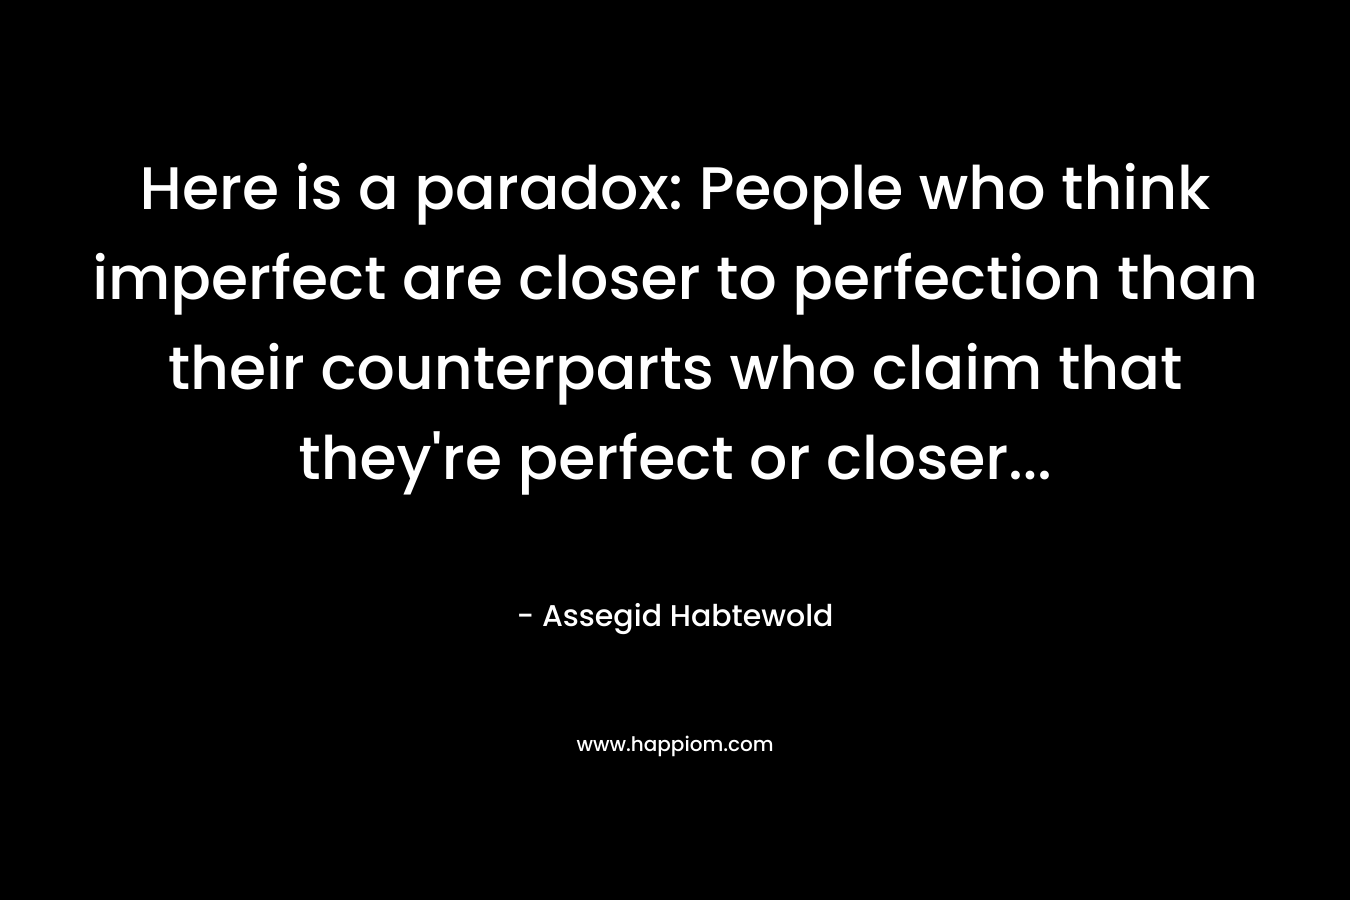 Here is a paradox: People who think imperfect are closer to perfection than their counterparts who claim that they’re perfect or closer… – Assegid Habtewold